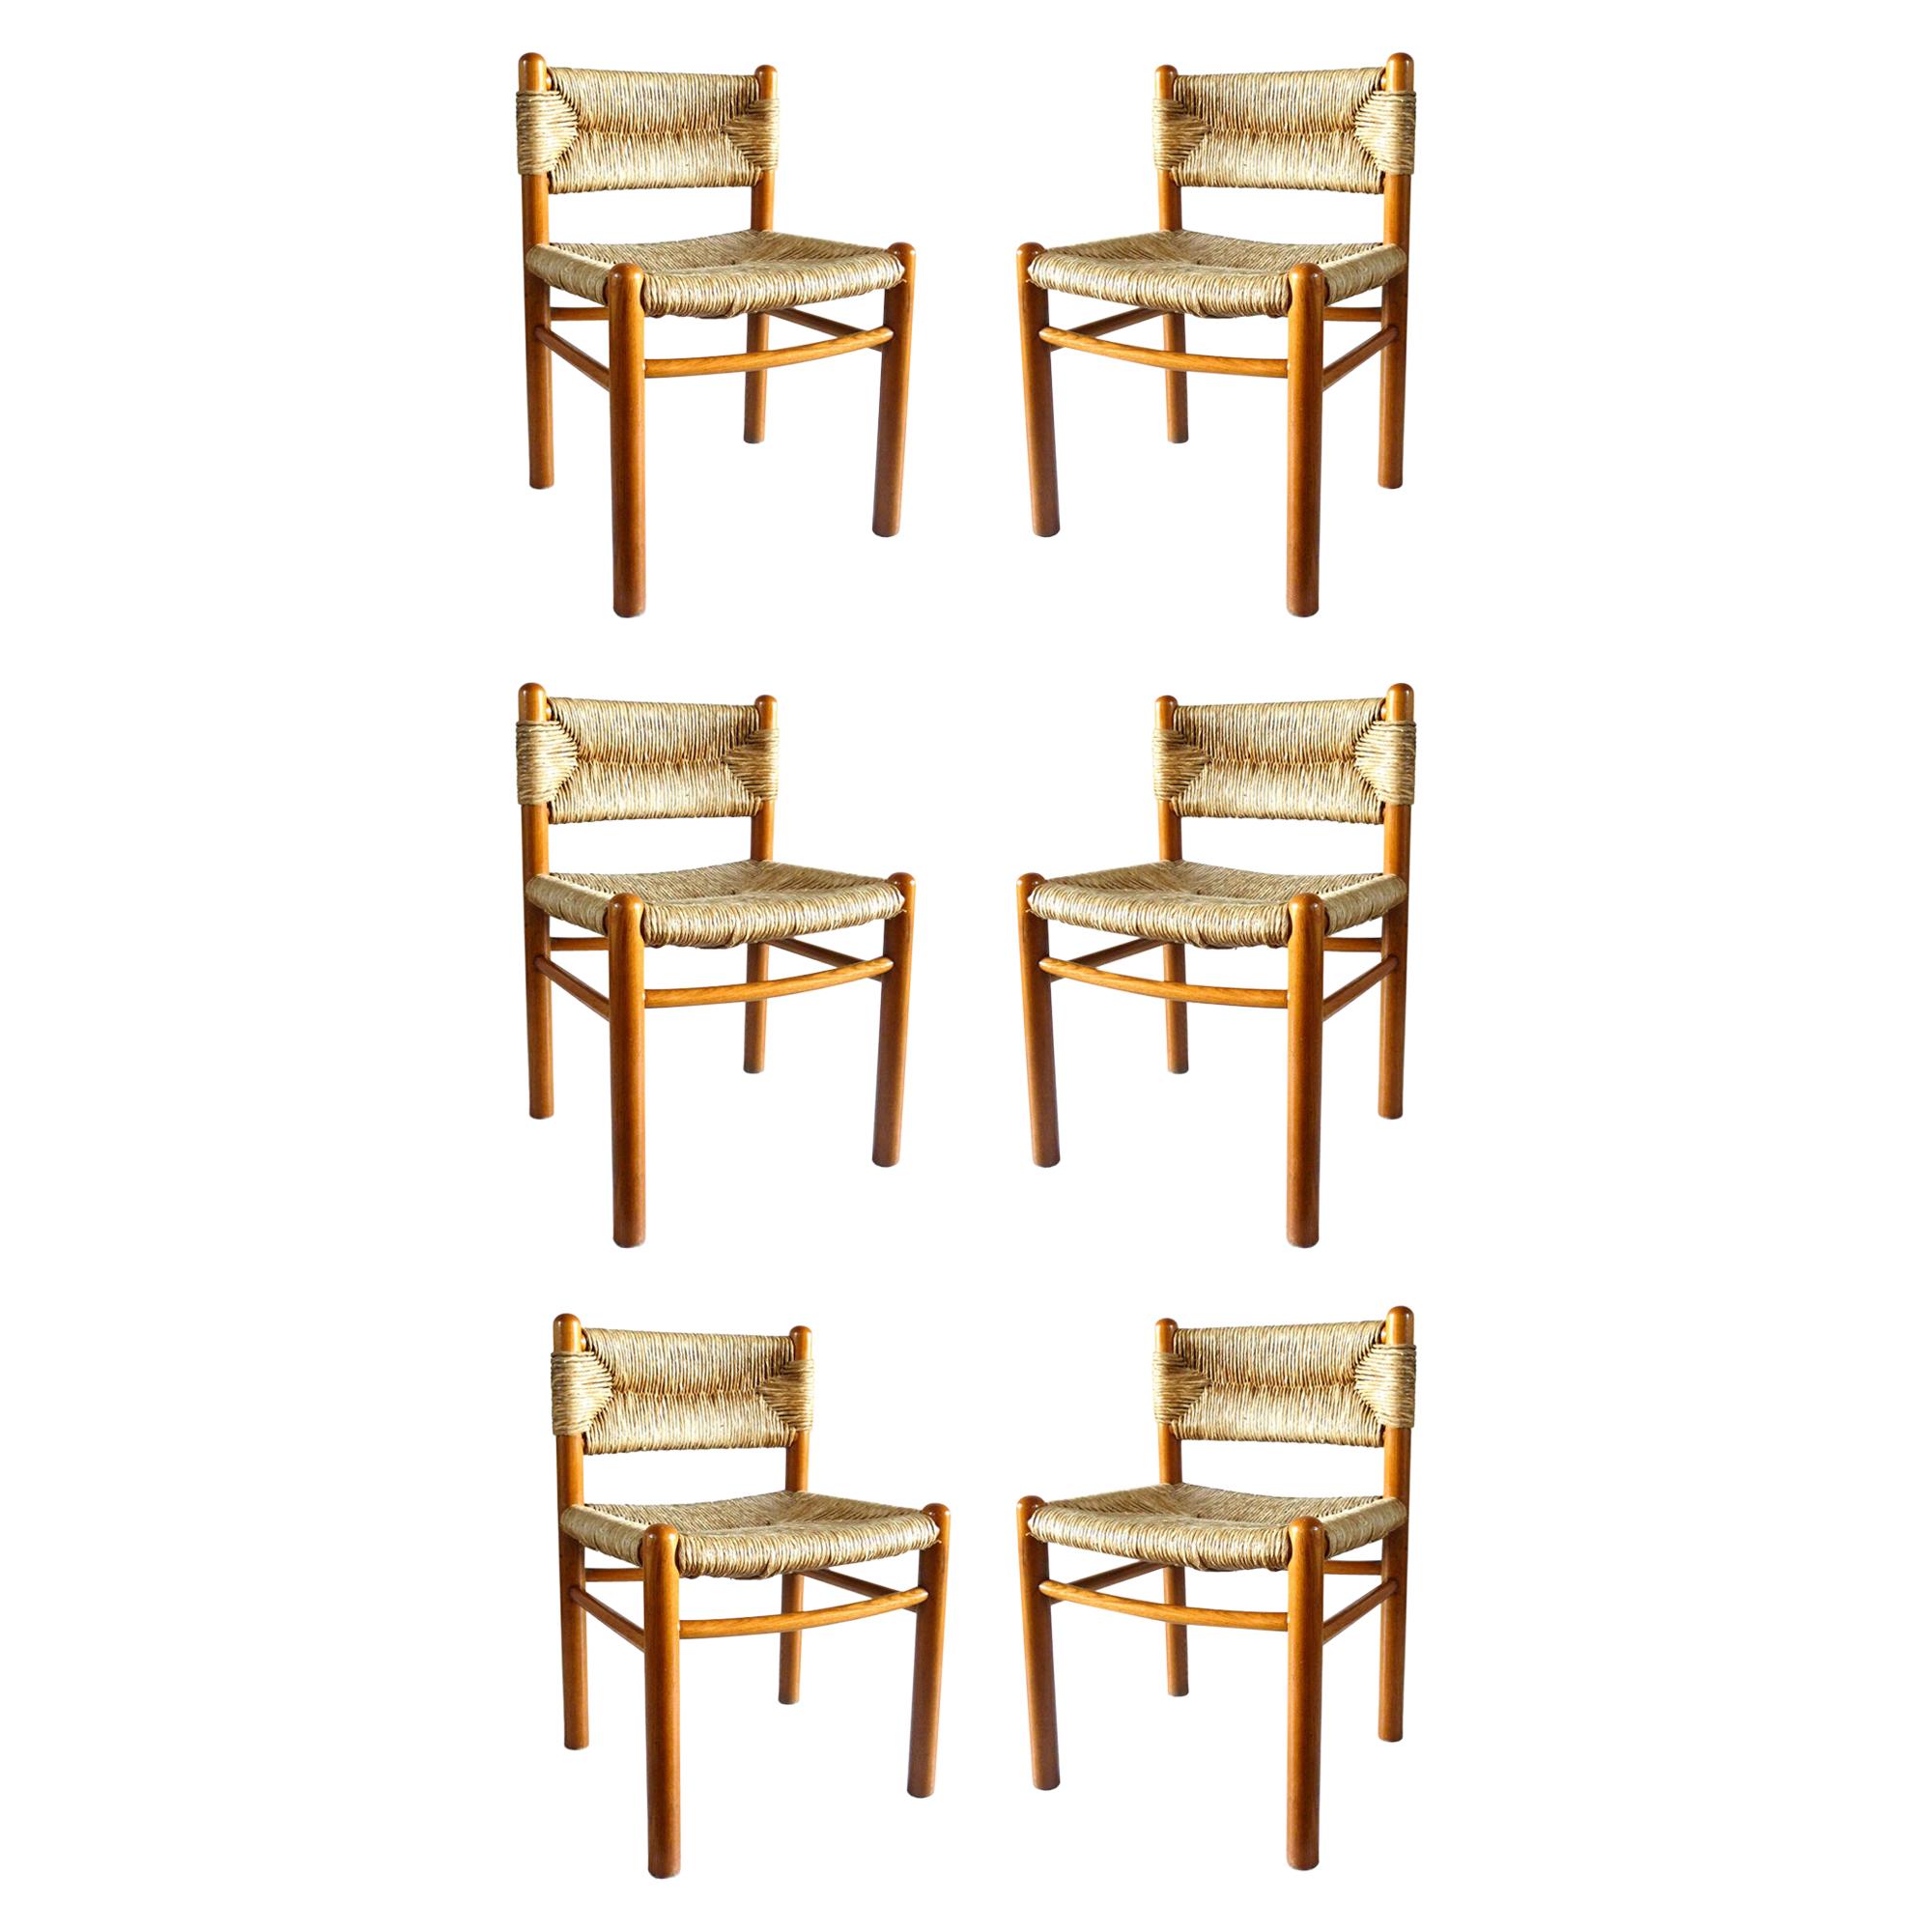 "Dordogne" style of Charlotte Perriand by Robert Sentou 1960 Wicker Six Chairs